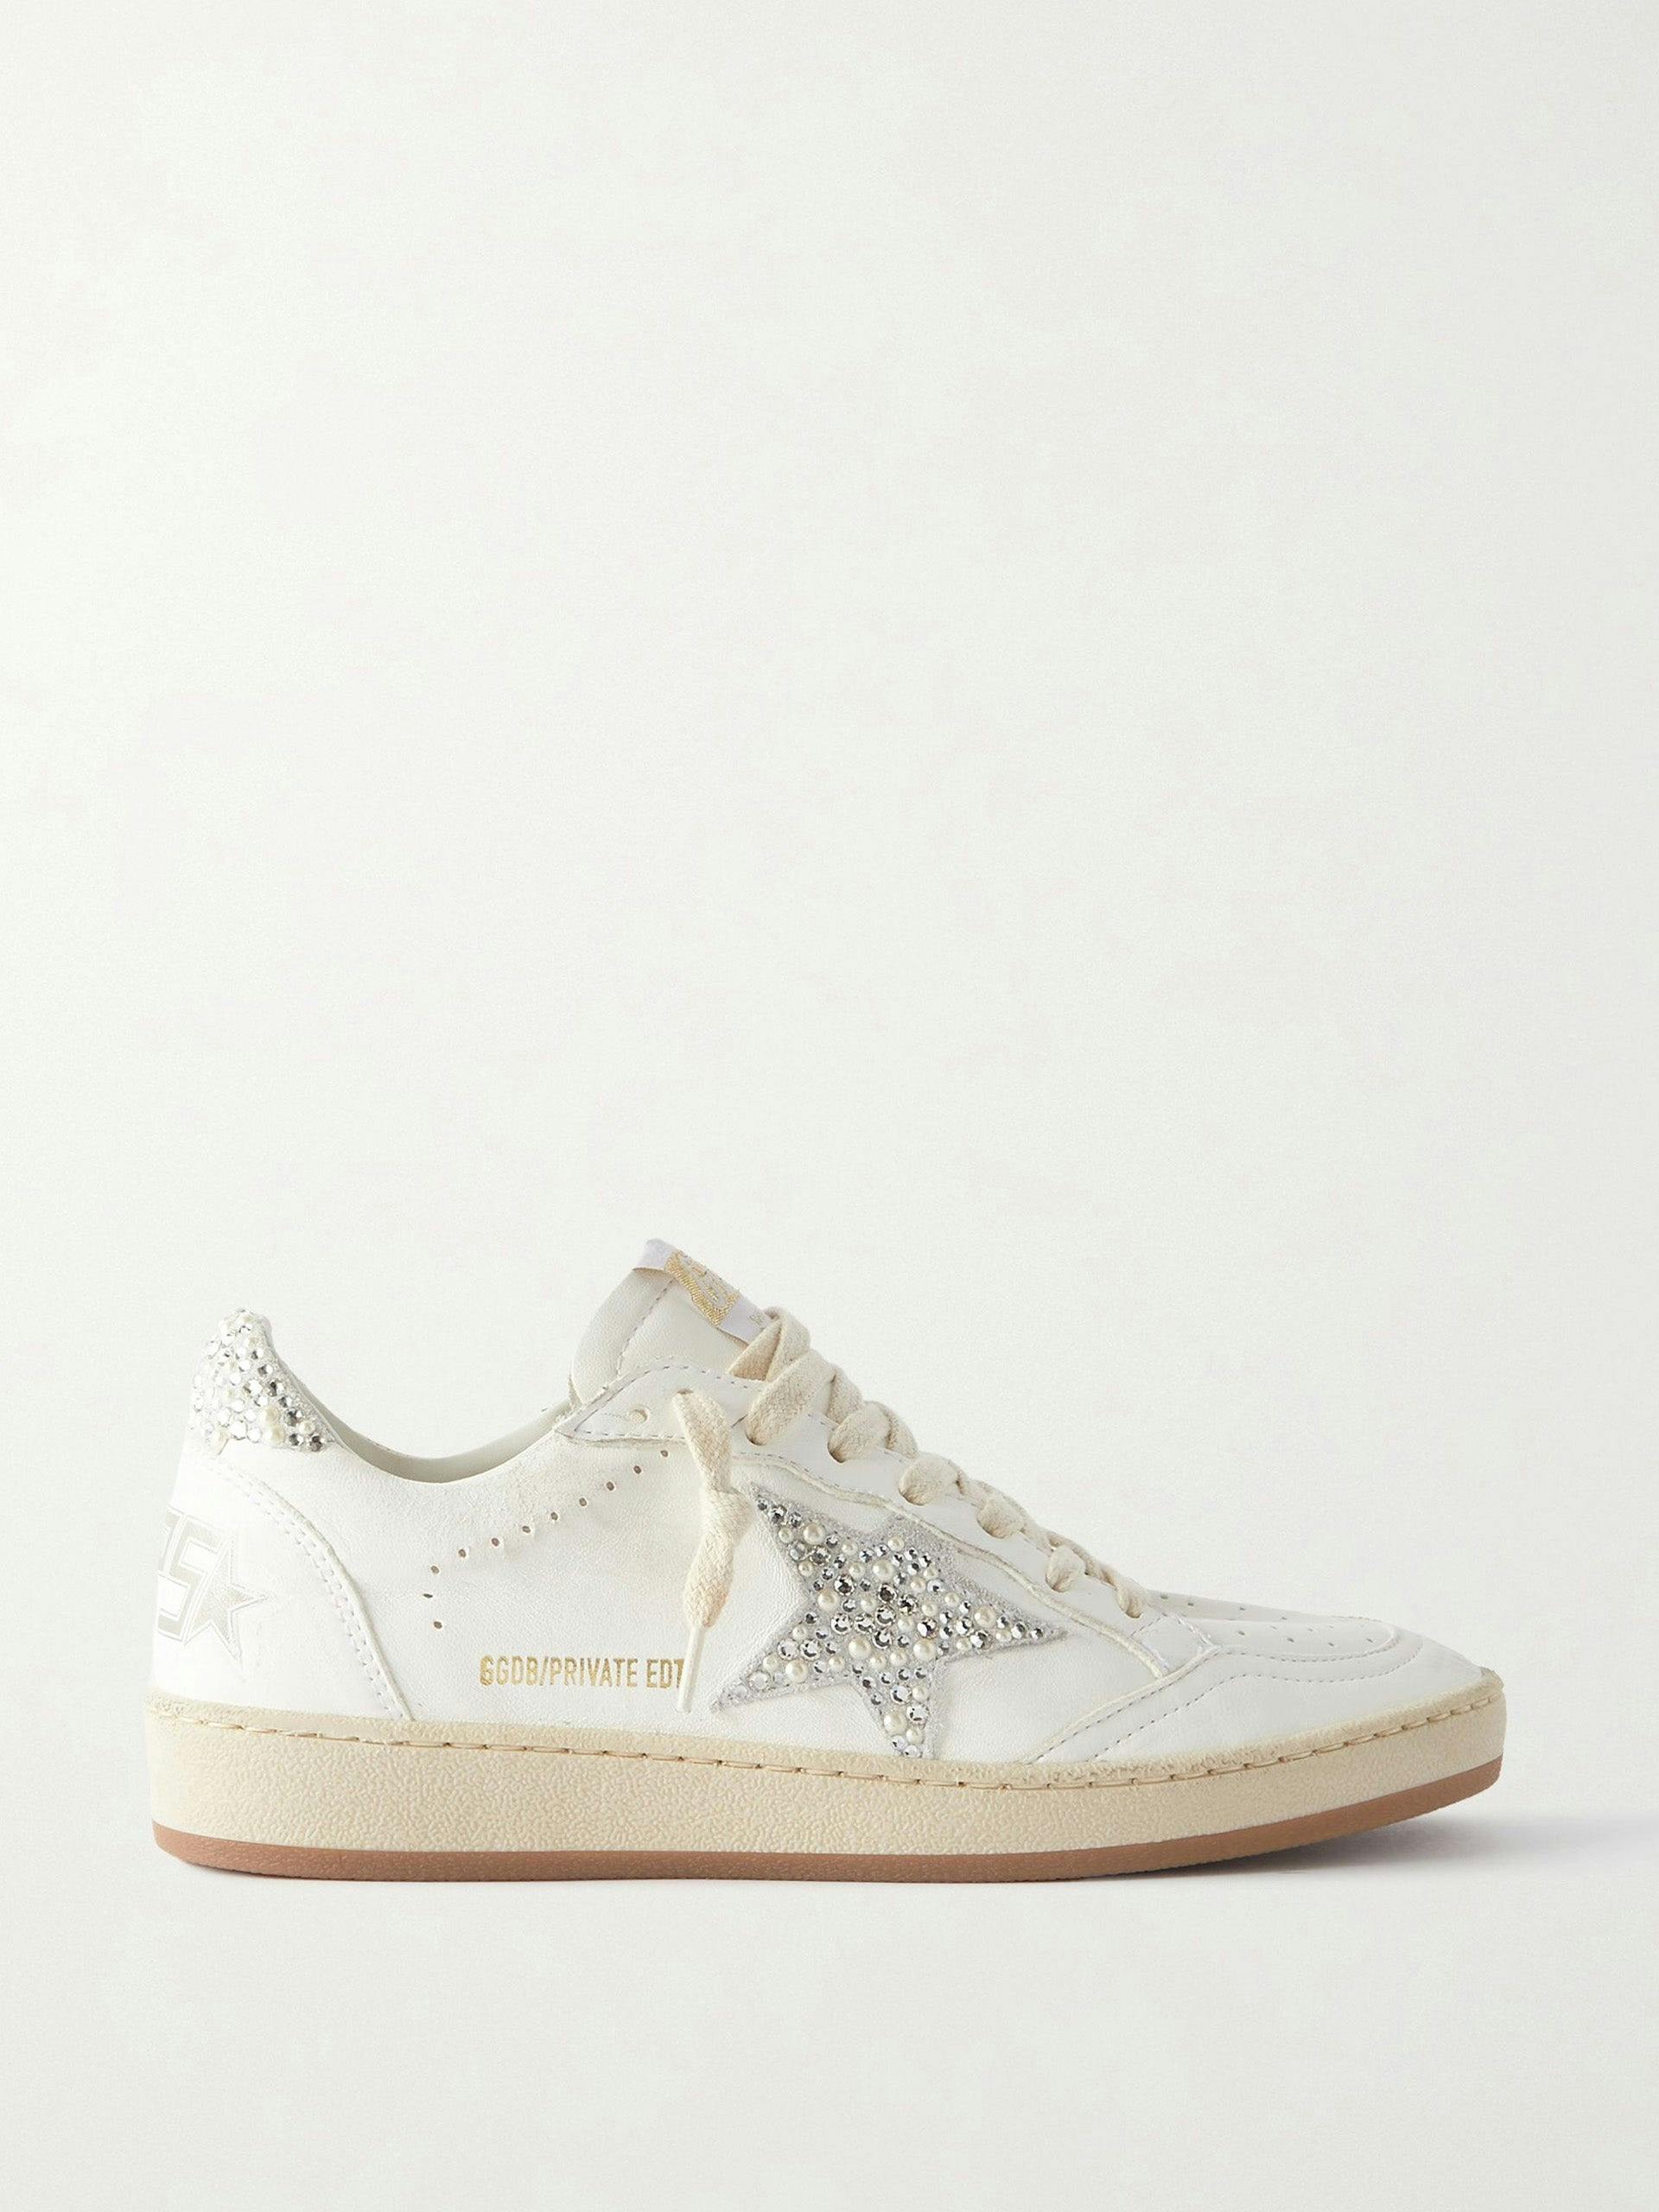 Shearling-lined white leather sneakers